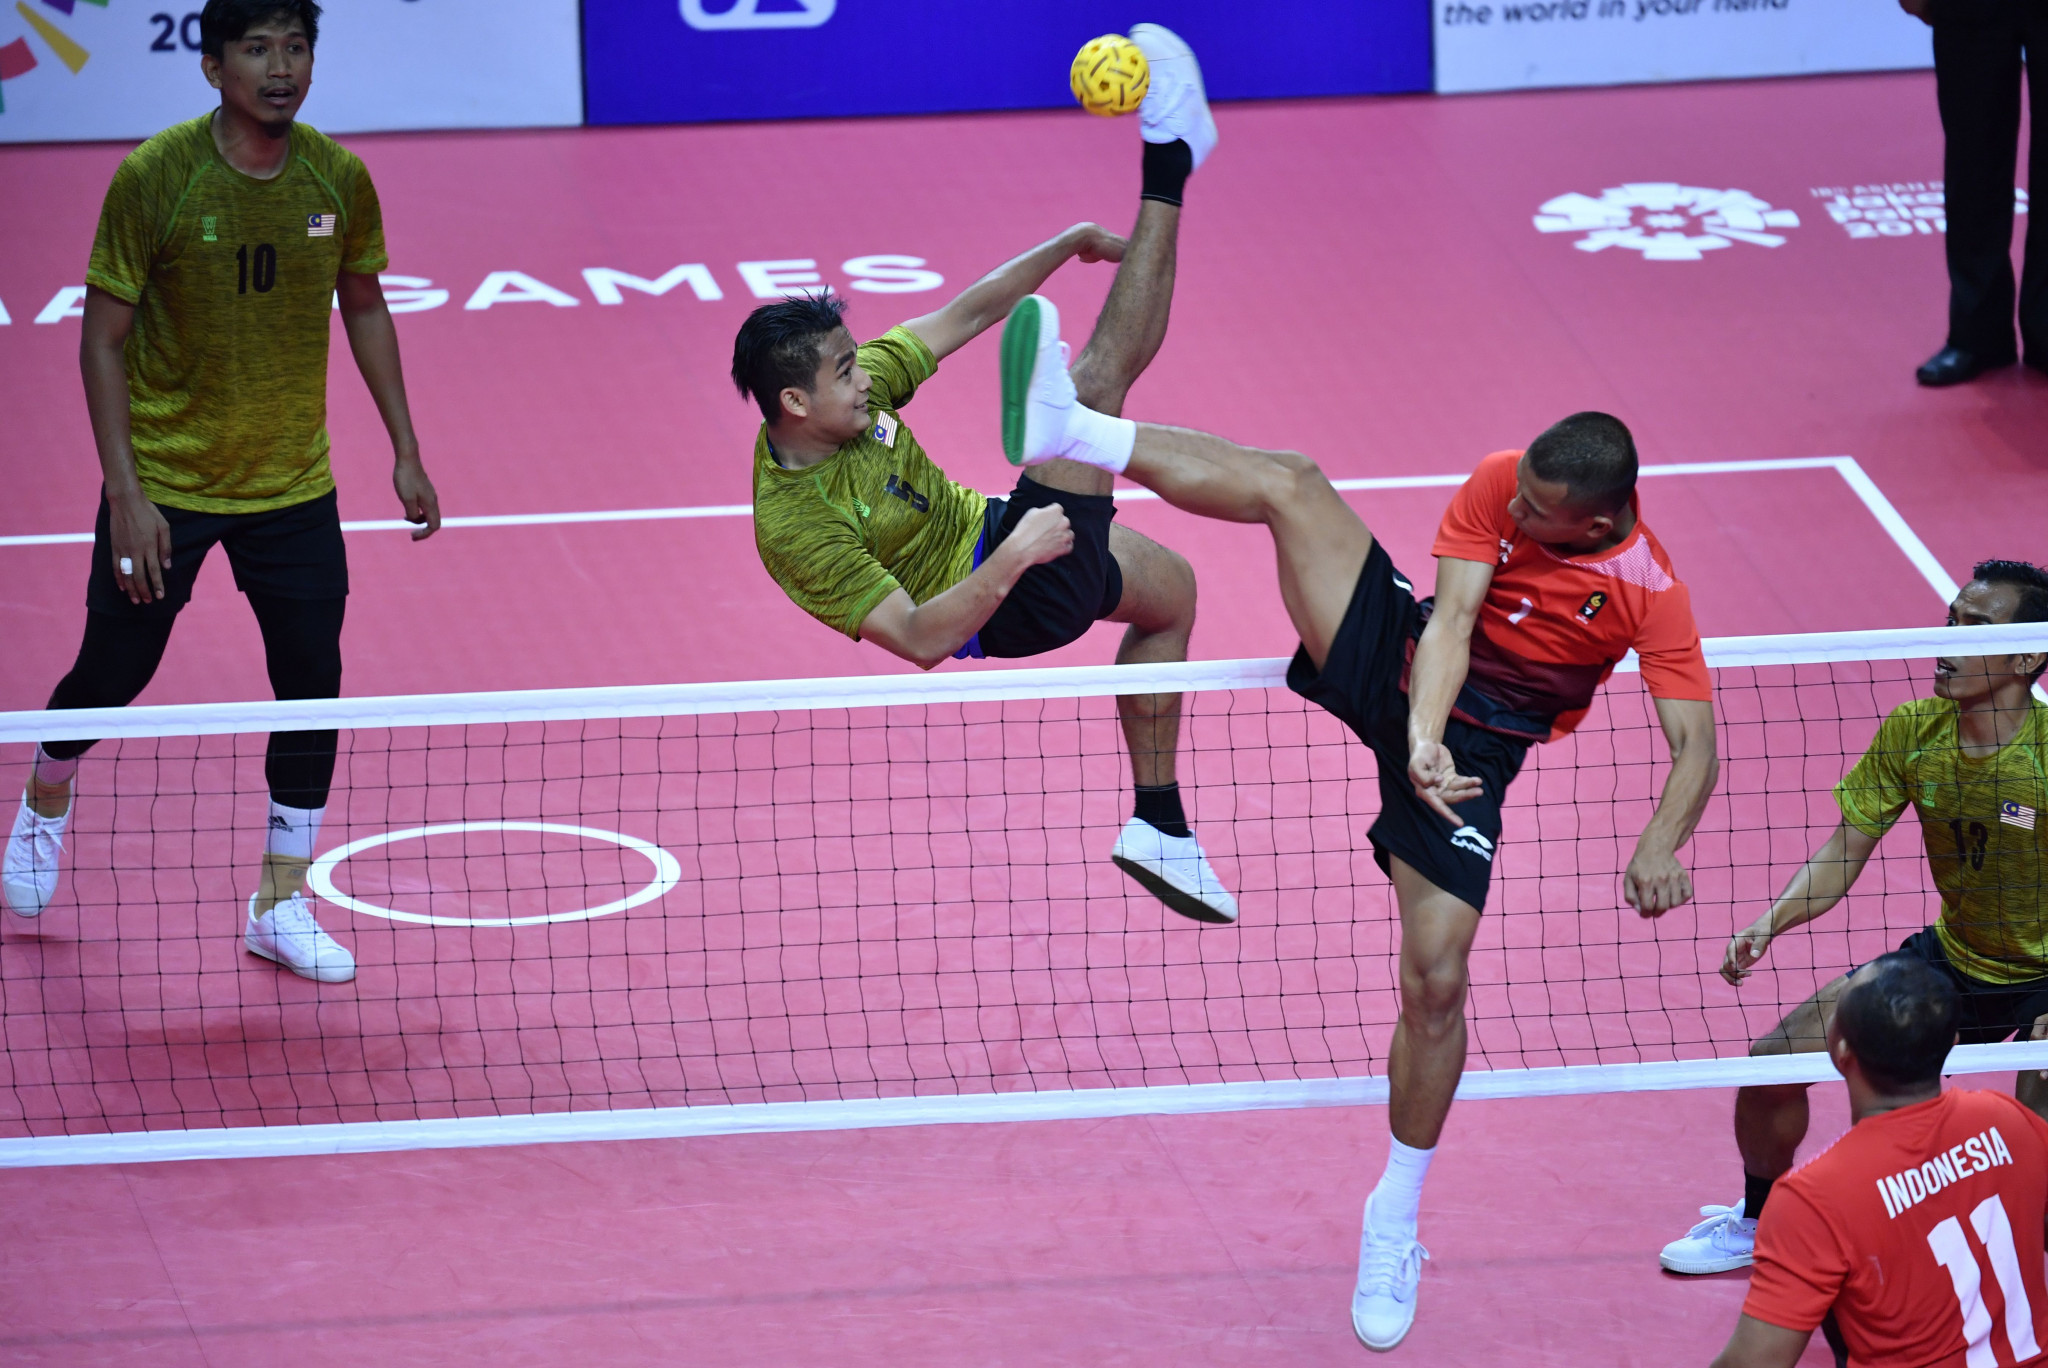 There was disappointment for Indonesia in the men's regu sepaktakraw final as Malaysia came from behind to beat them 2-1 ©Getty Images